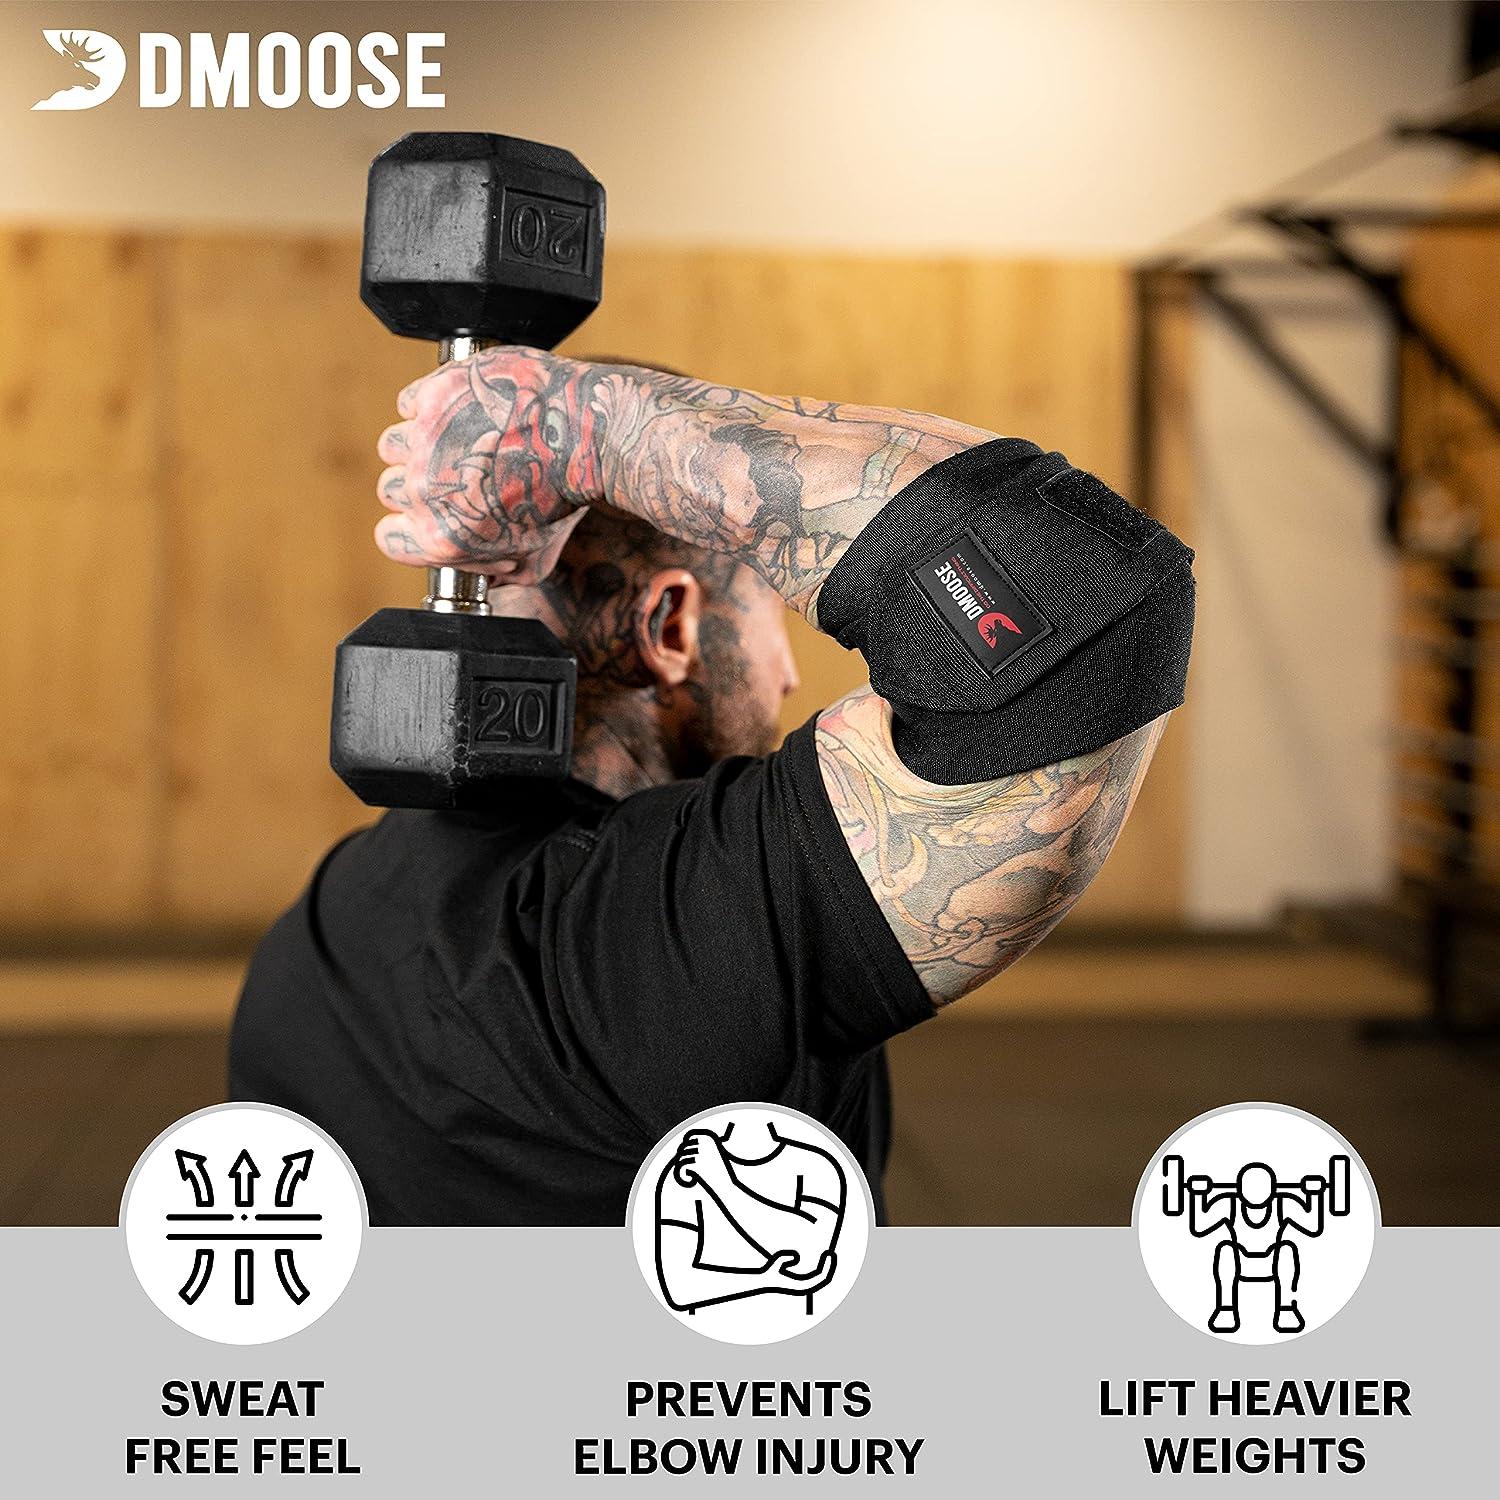 Elbow Wraps vs Sleeves – What's Best for Training? – DMoose